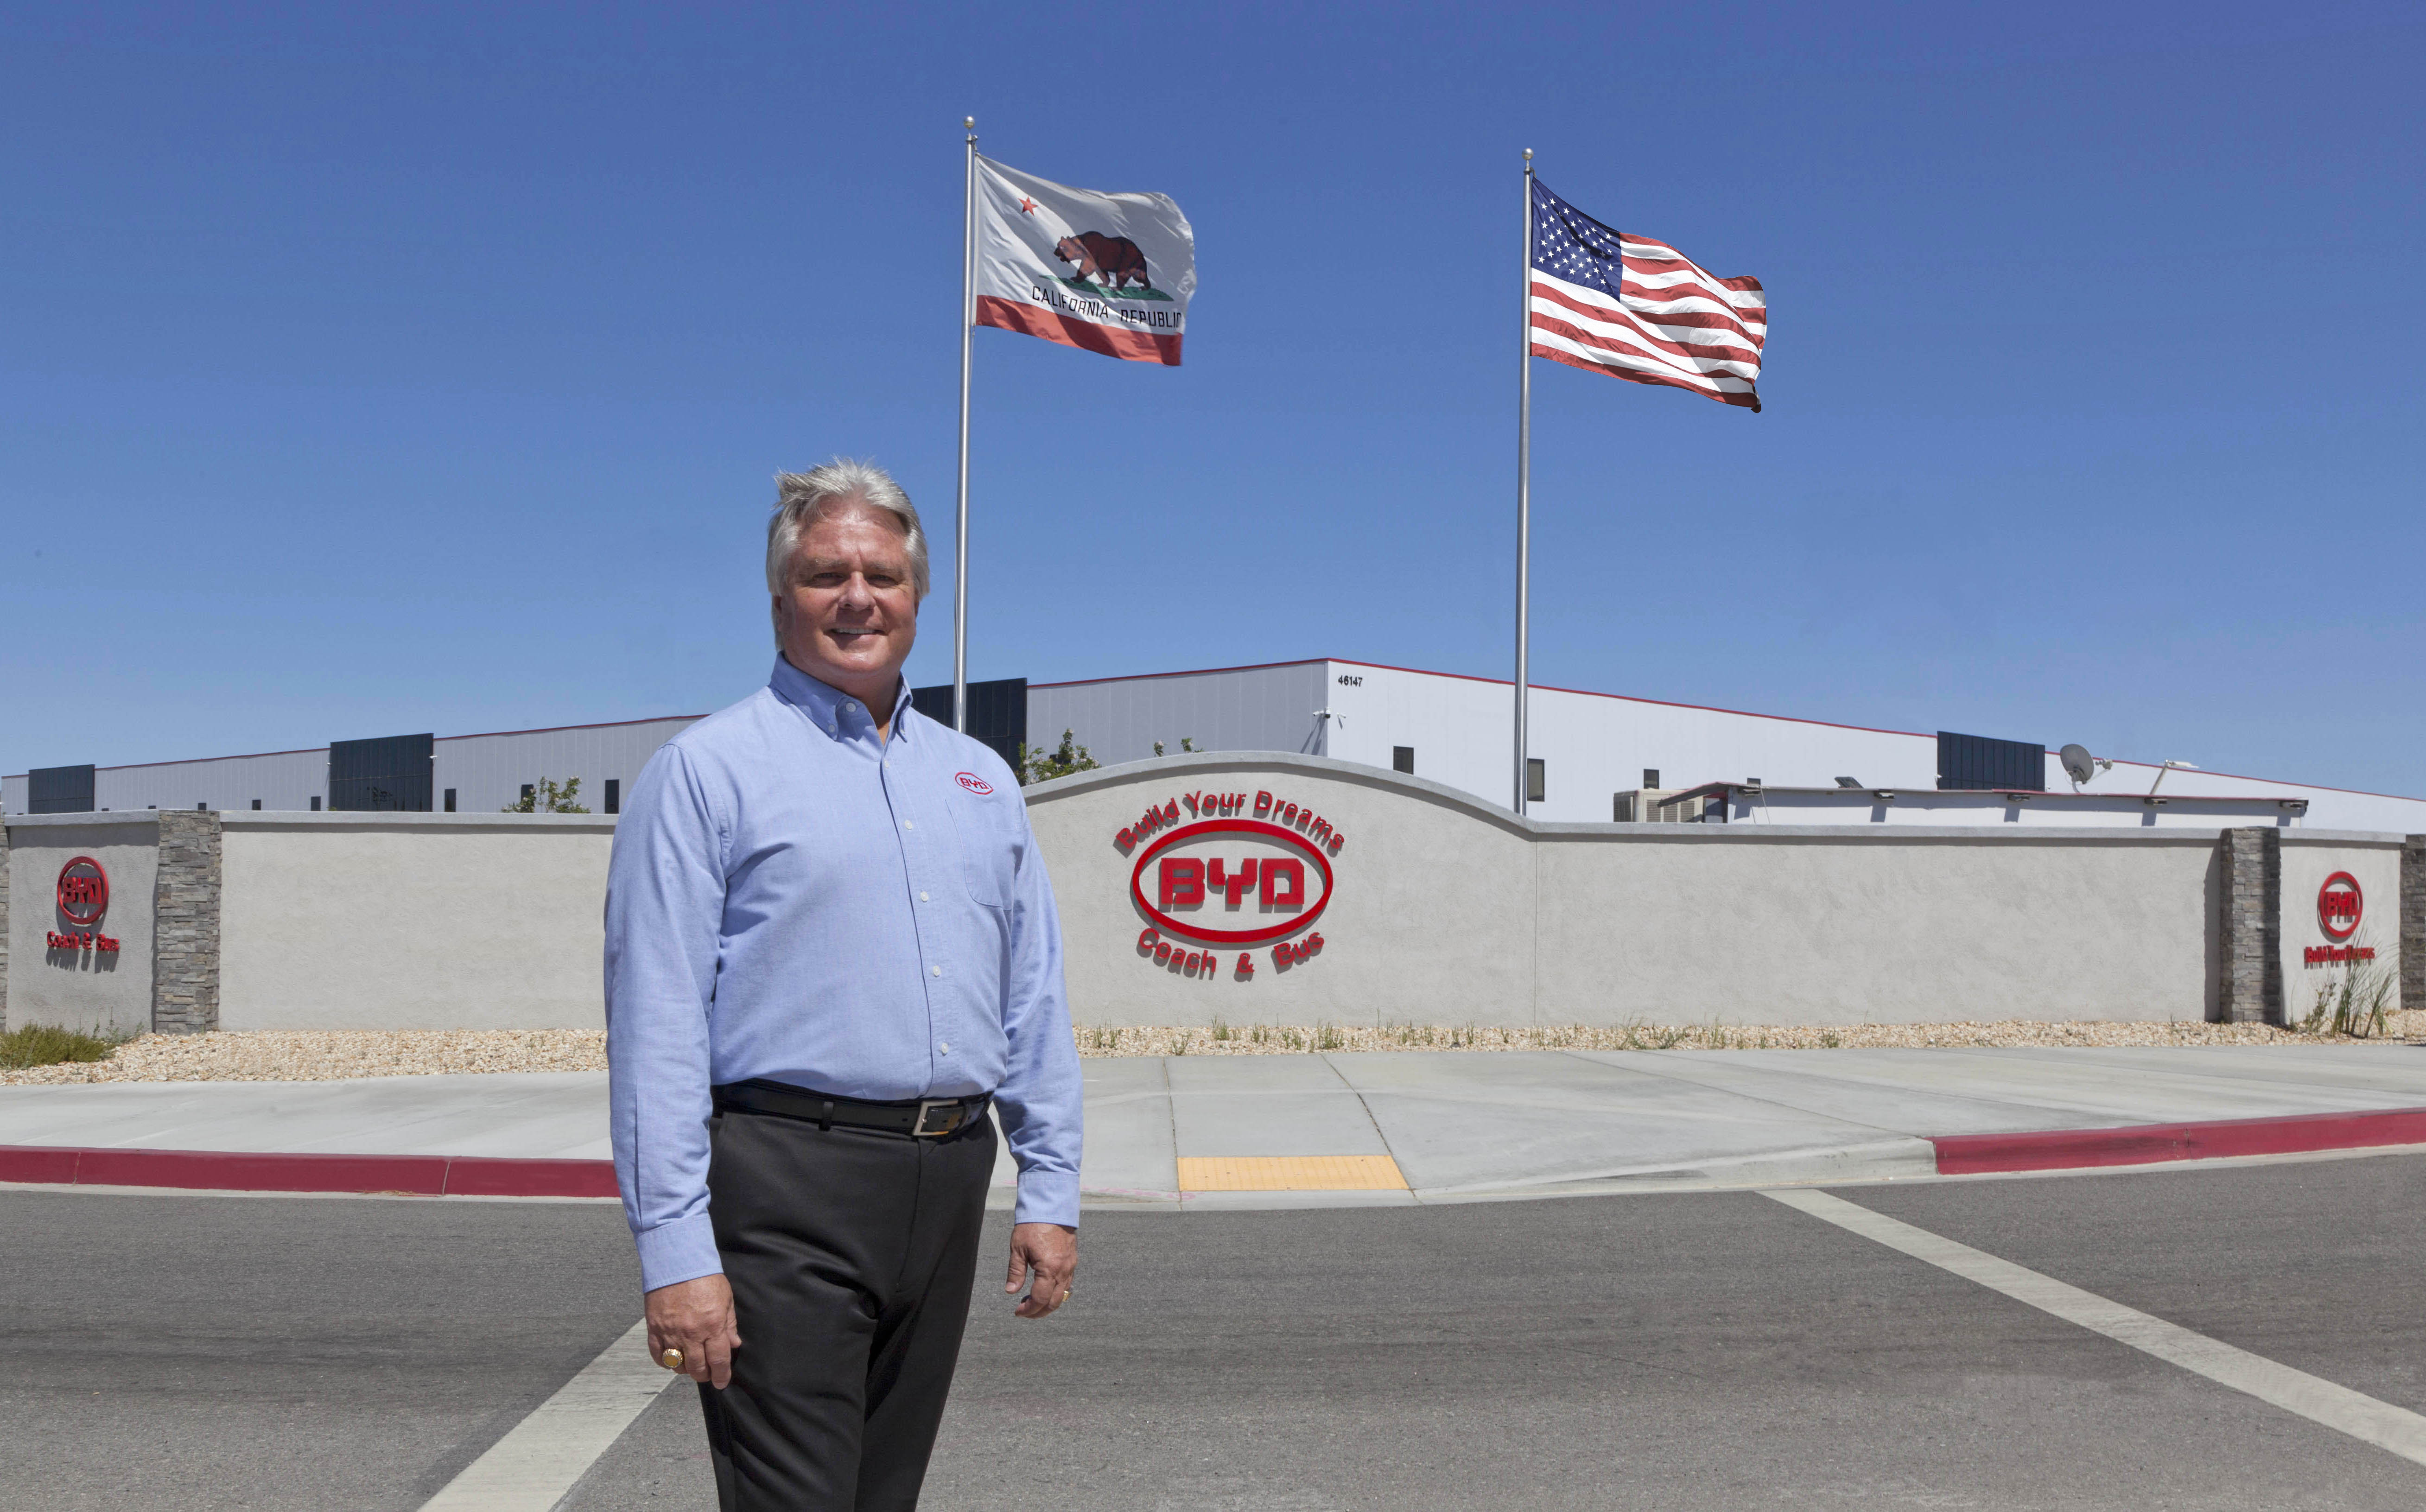 Bobby Hill, Vice President of Sales with BYD’s North America division